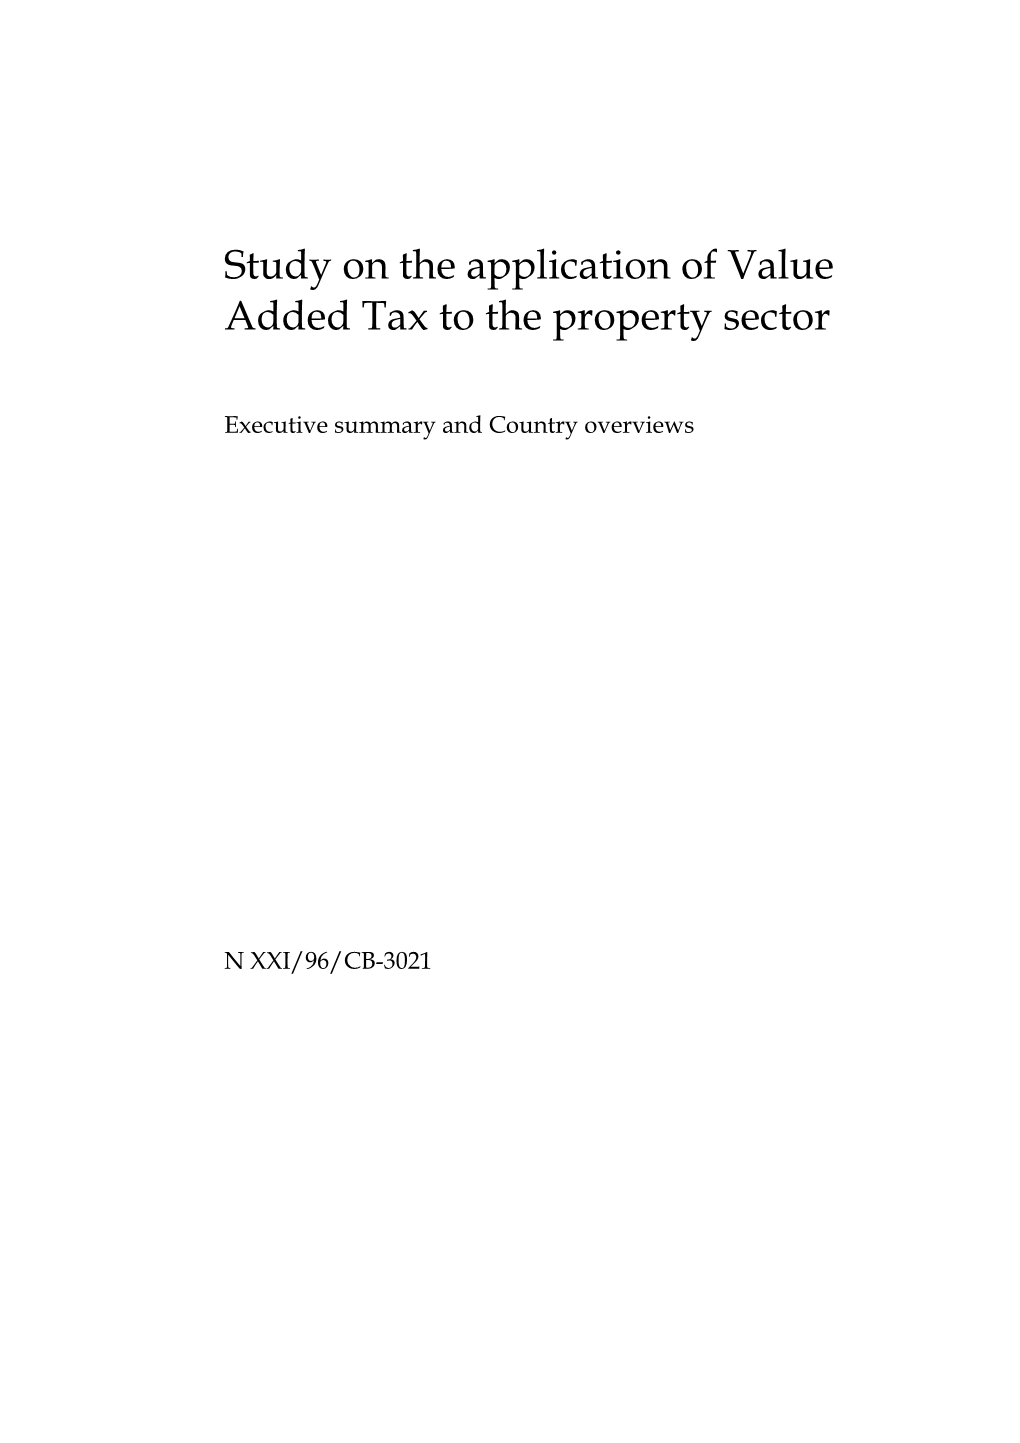 Study on the Application of Value Added Tax to the Property Sector